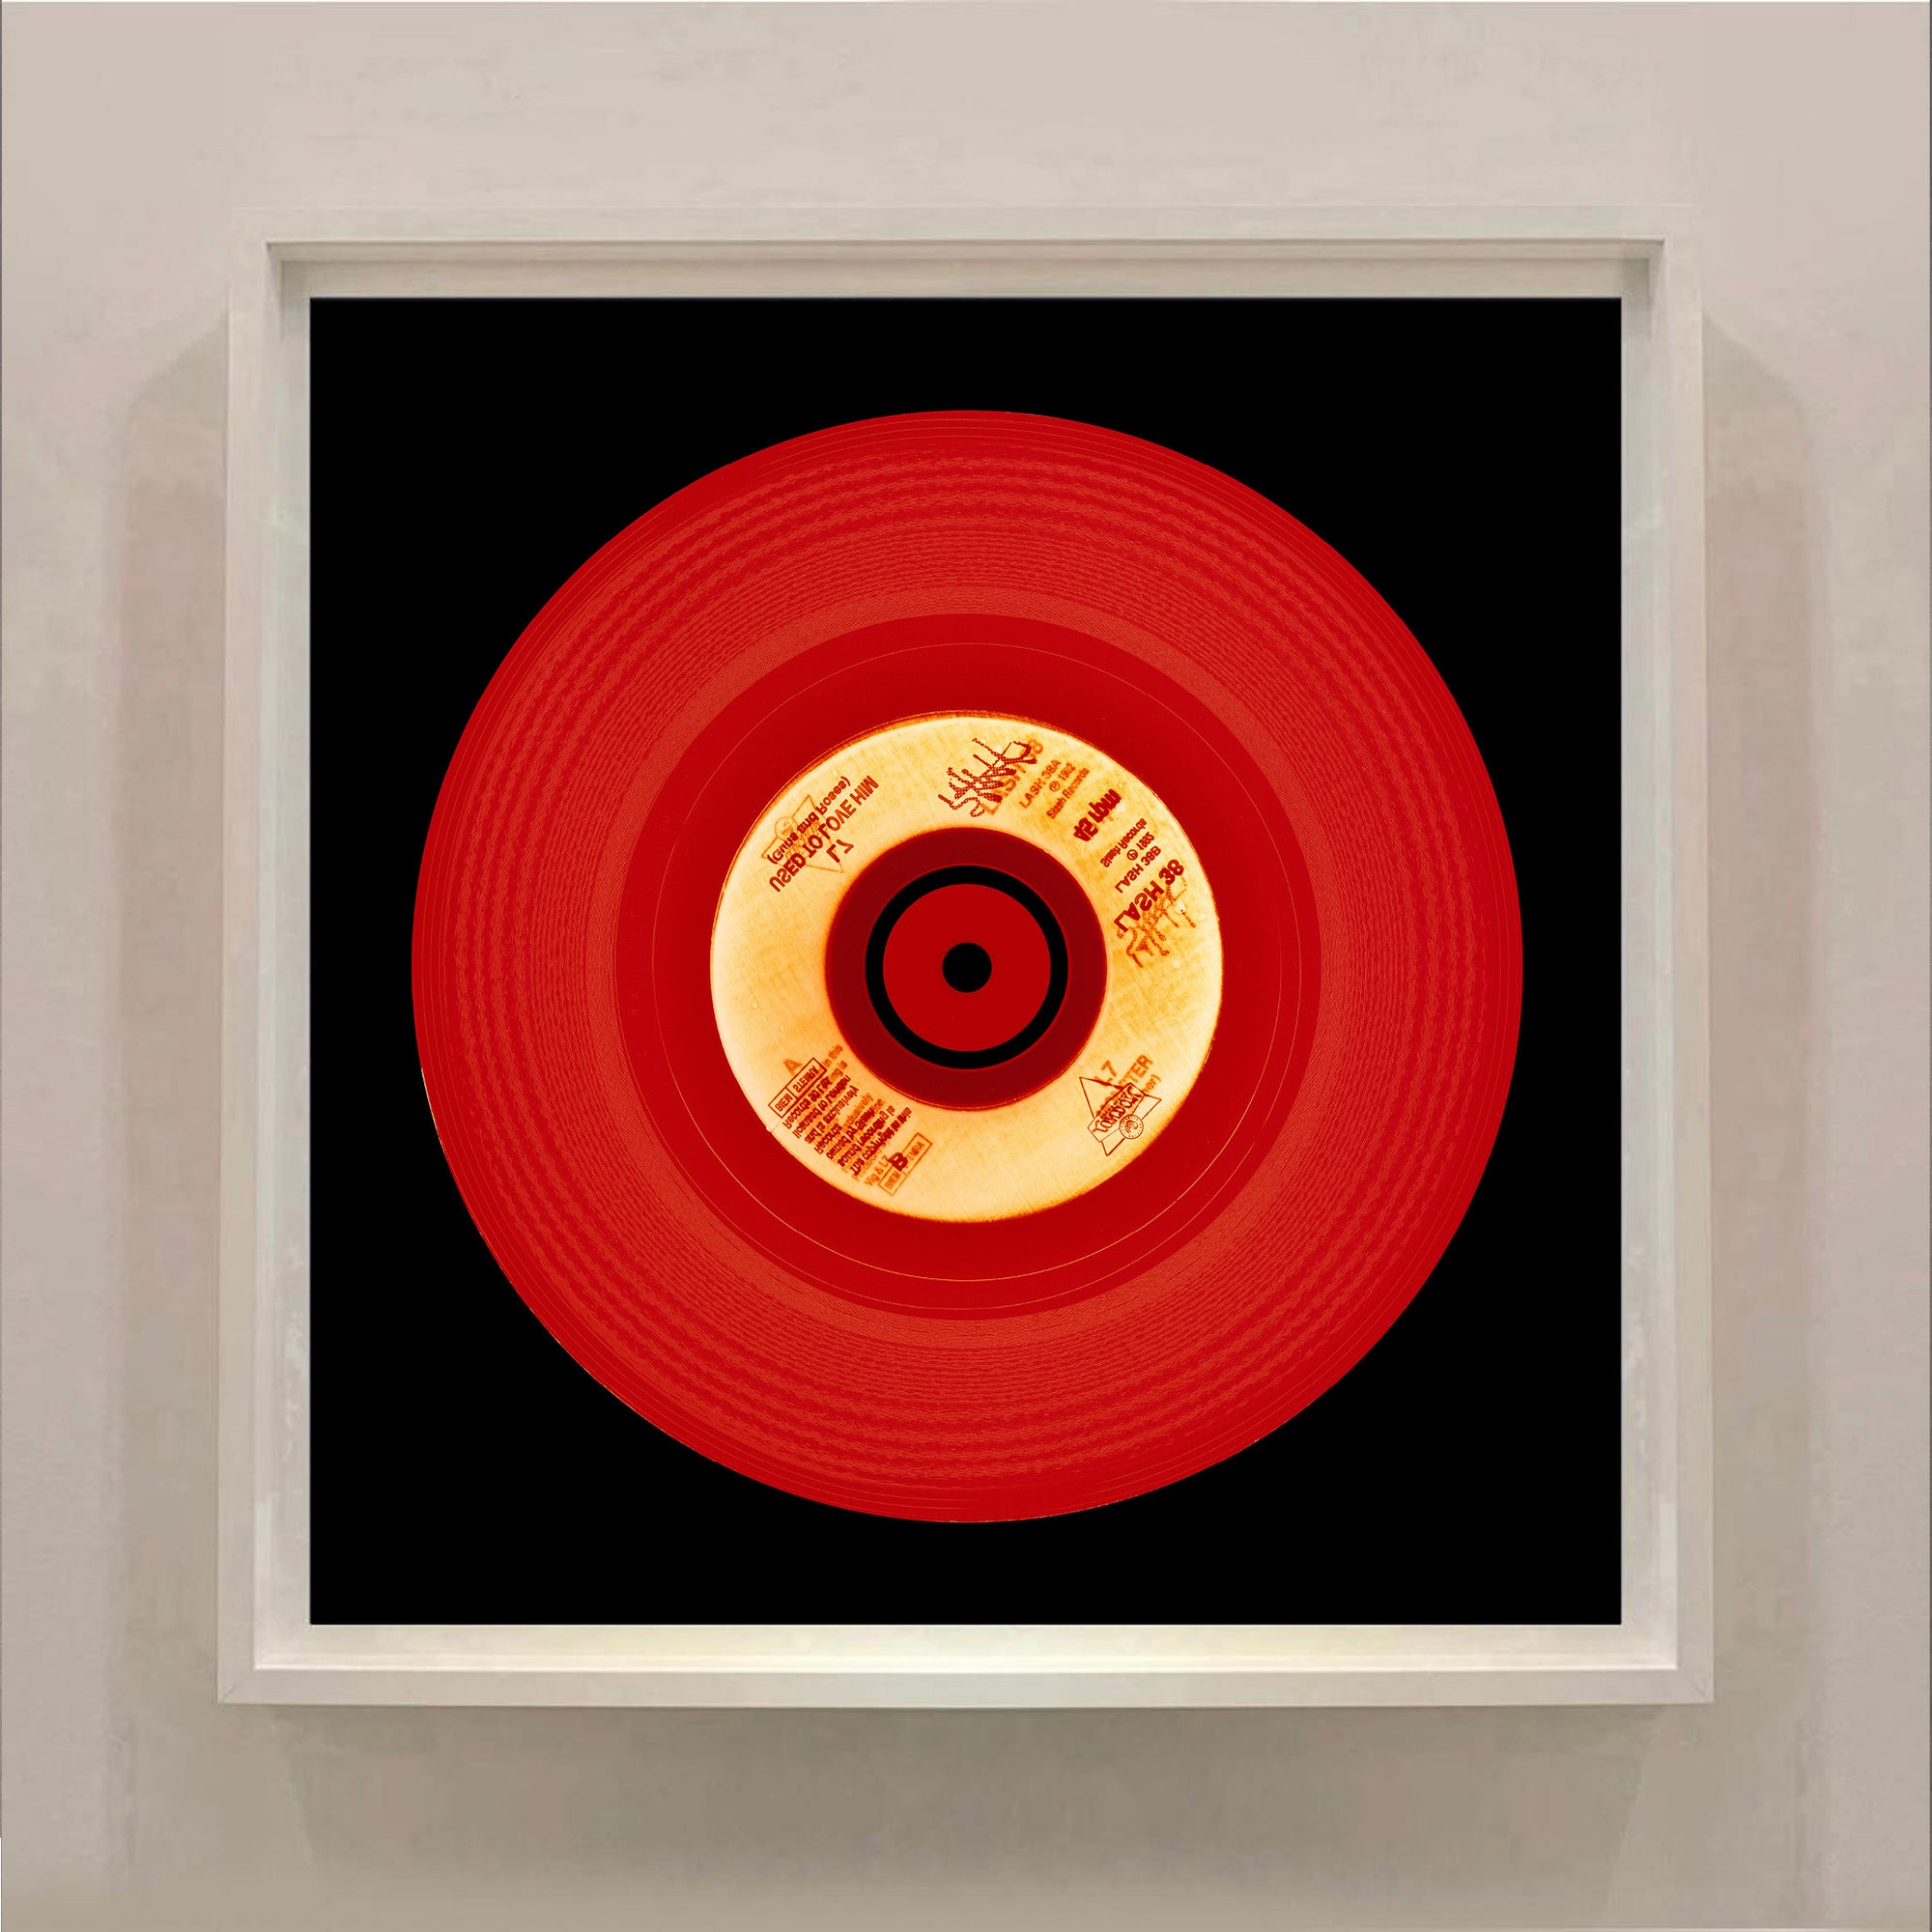 Photograph of a red vinyl record on a black background. Photographers Heidler and Heeps